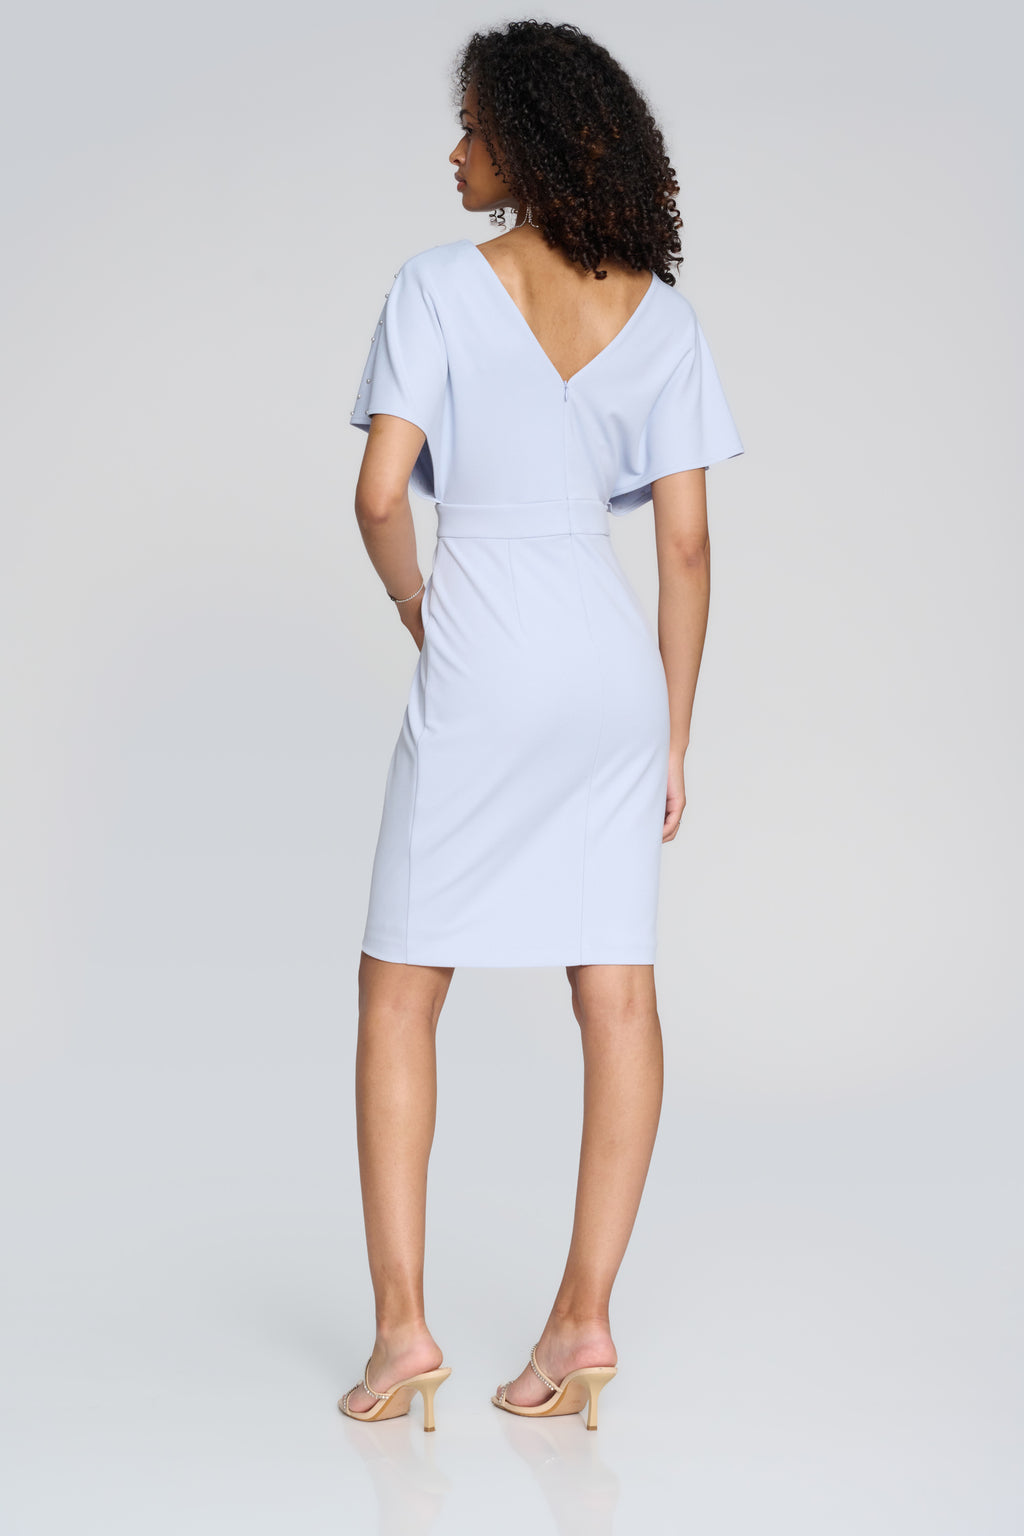 Joseph Ribkoff Celestial Blue Wrap Dress with Pearl Detail Style 241761